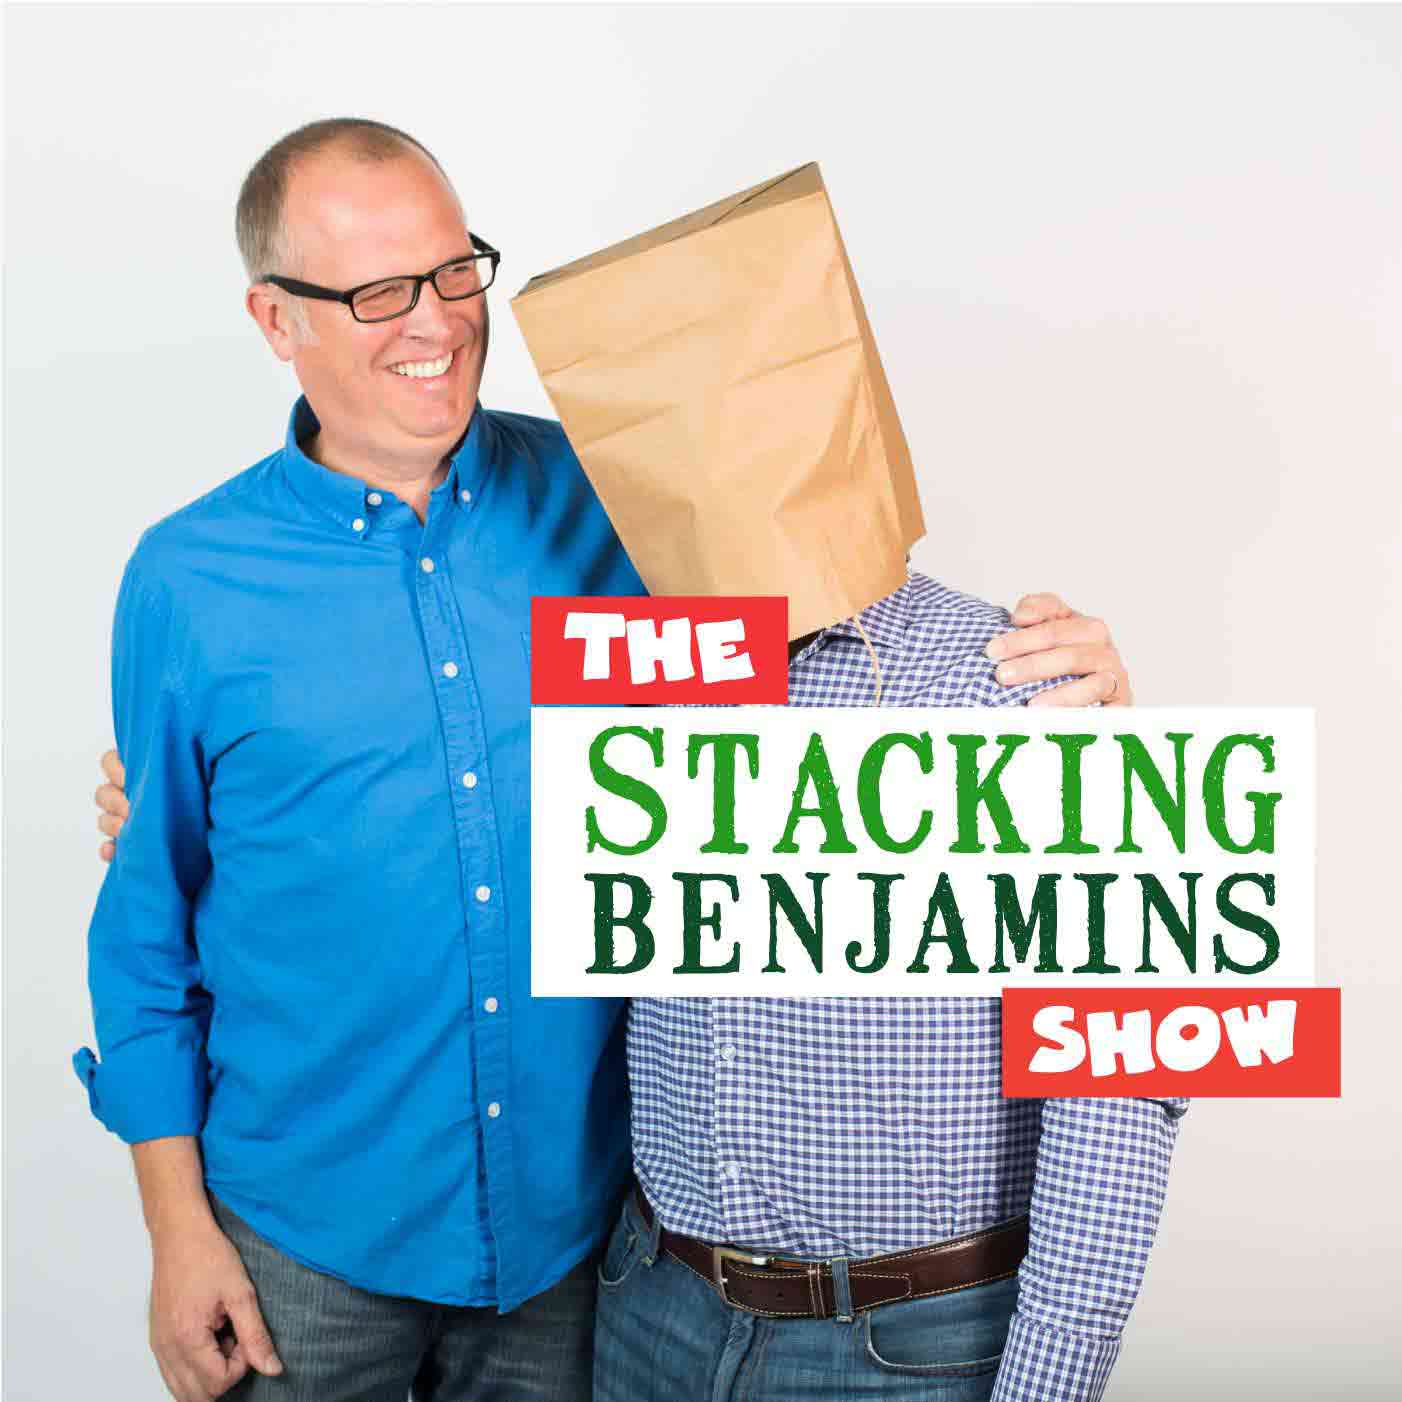 THE STACKING BENJAMINS SHOW JOINS WESTWOOD ONE PODCAST NETWORK